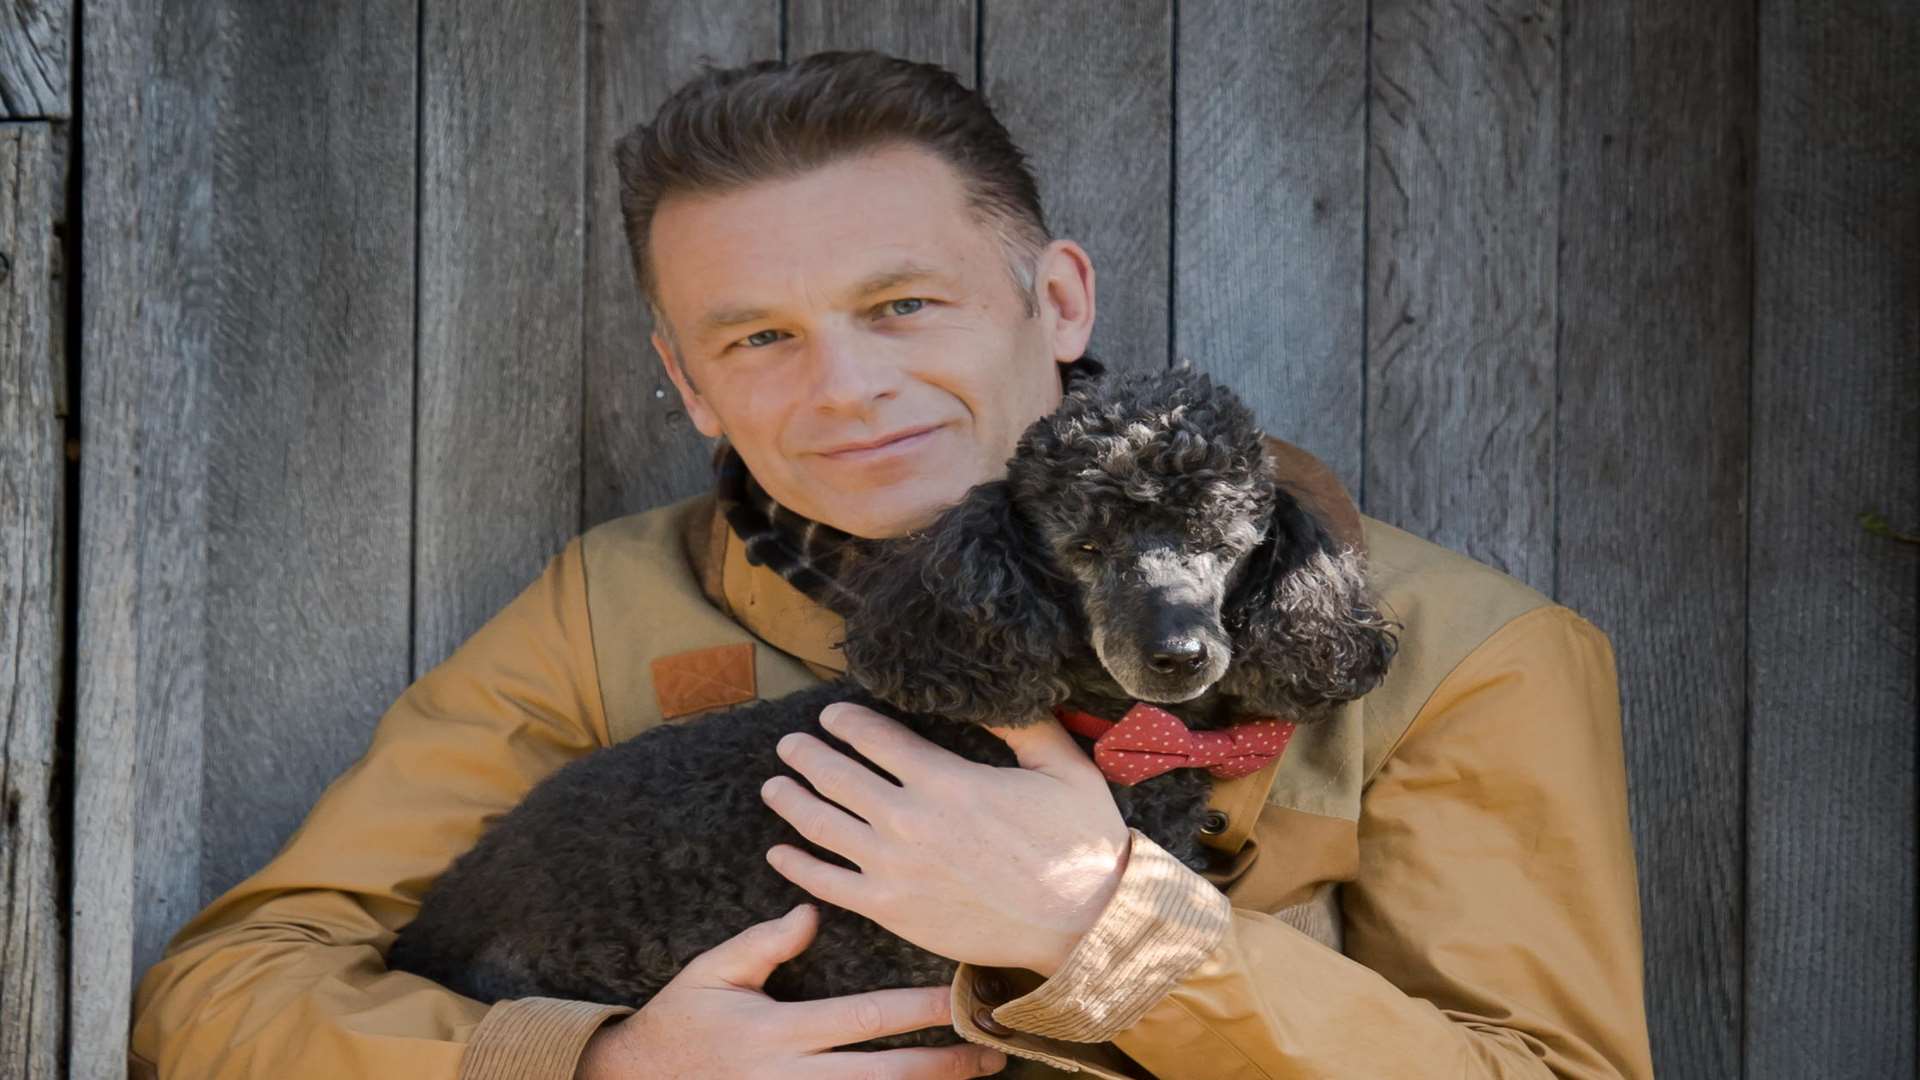 Chris Packham and his dog Scratchy.